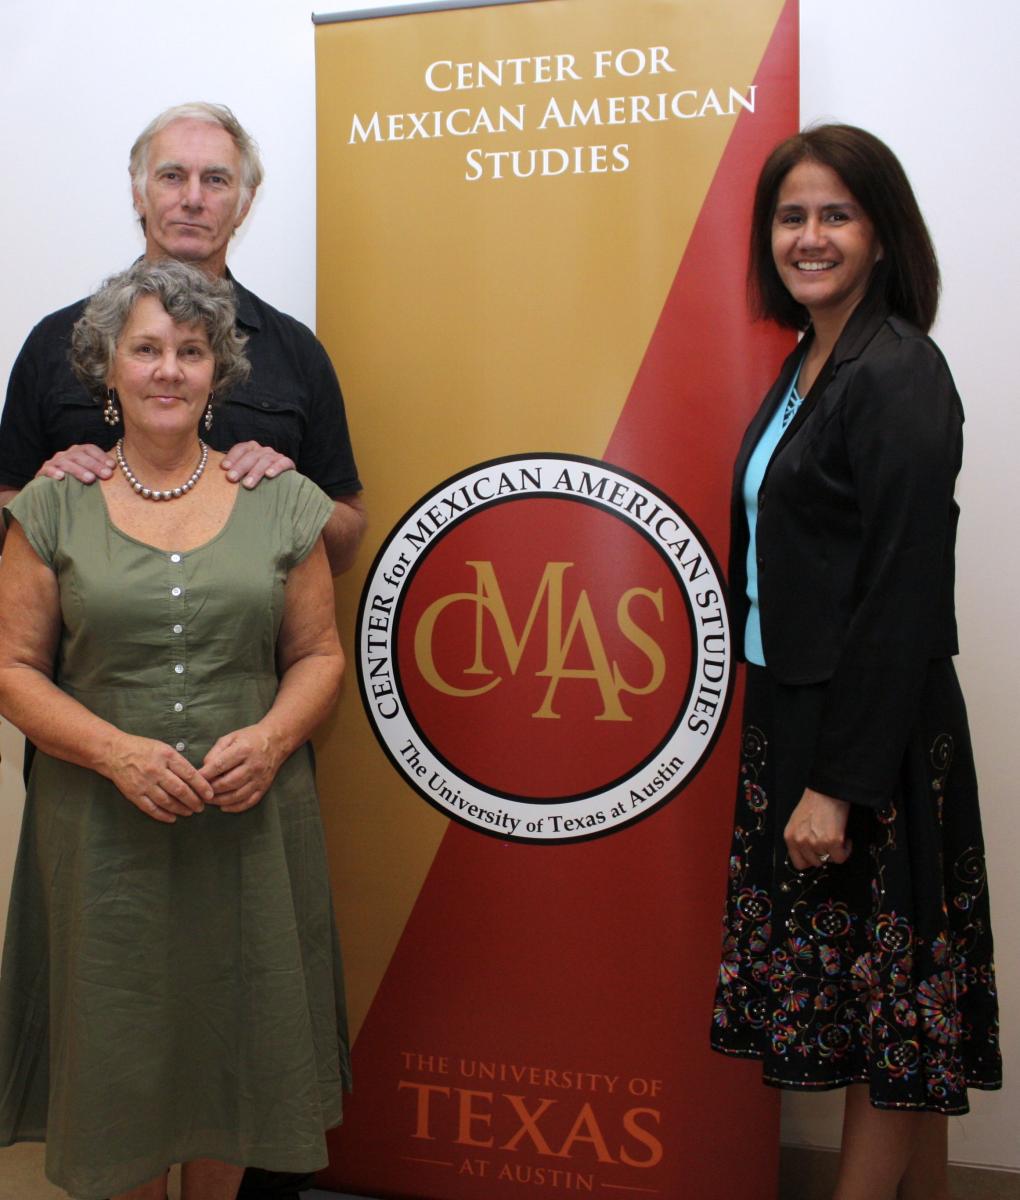 Domino Perez with John Sayles and Maggie Renzi at the Center for Mexican American Studies